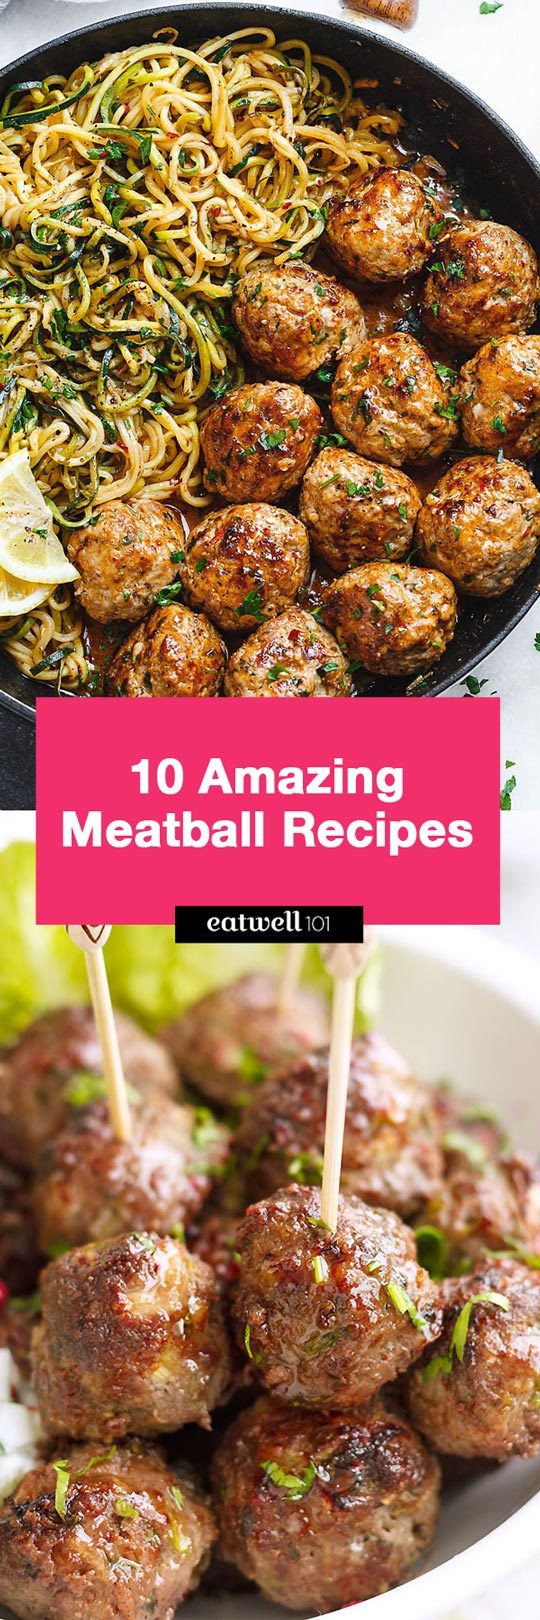 10 Amazing Meatball Recipes - These meatballs recipes are all so good and simple to make, you will be amazed!